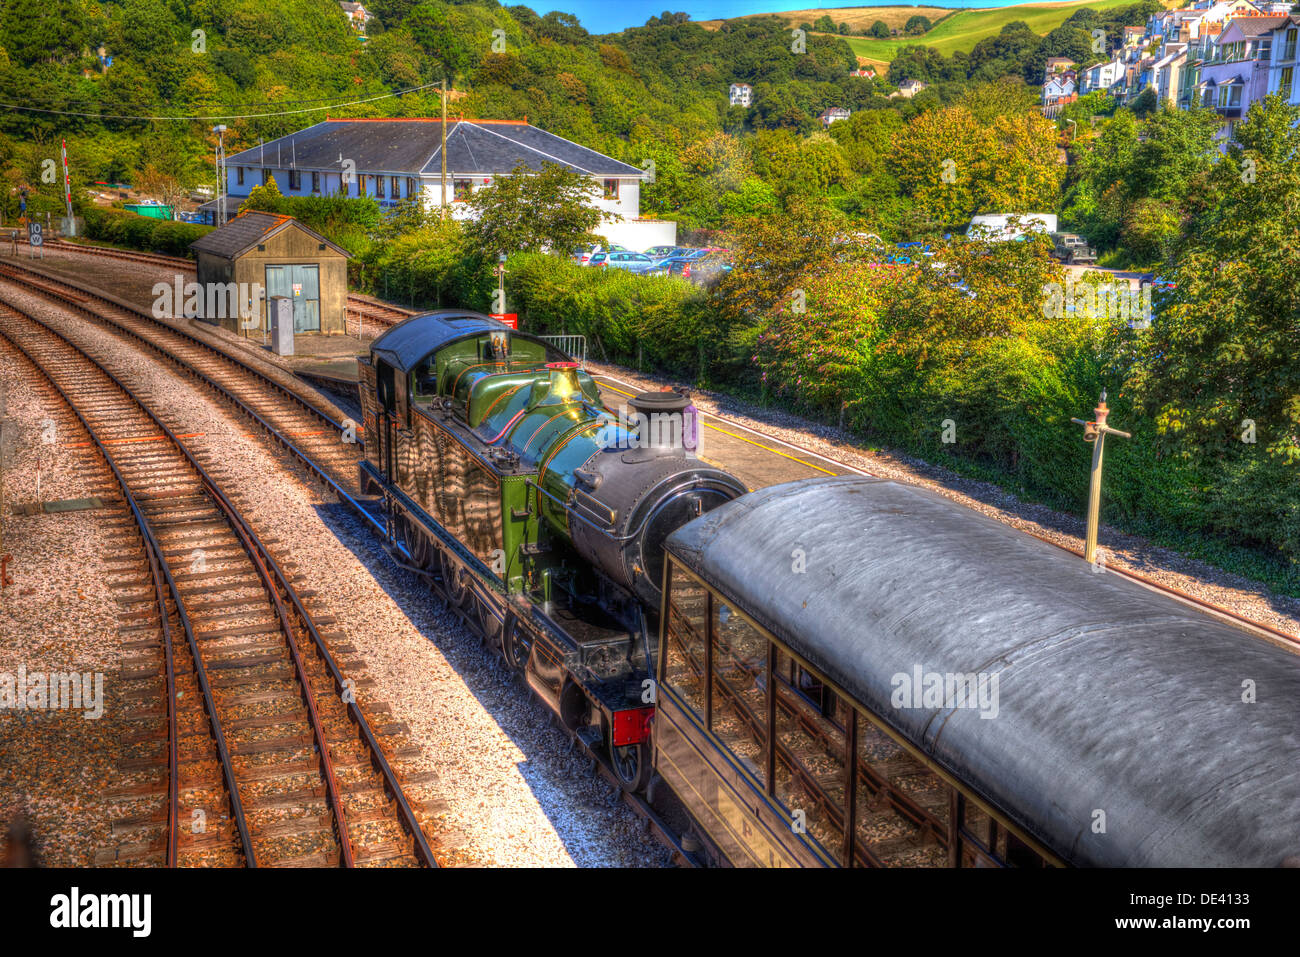 Green Steam Train and carriage in station with railway tracks in HDR like painting Stock Photo